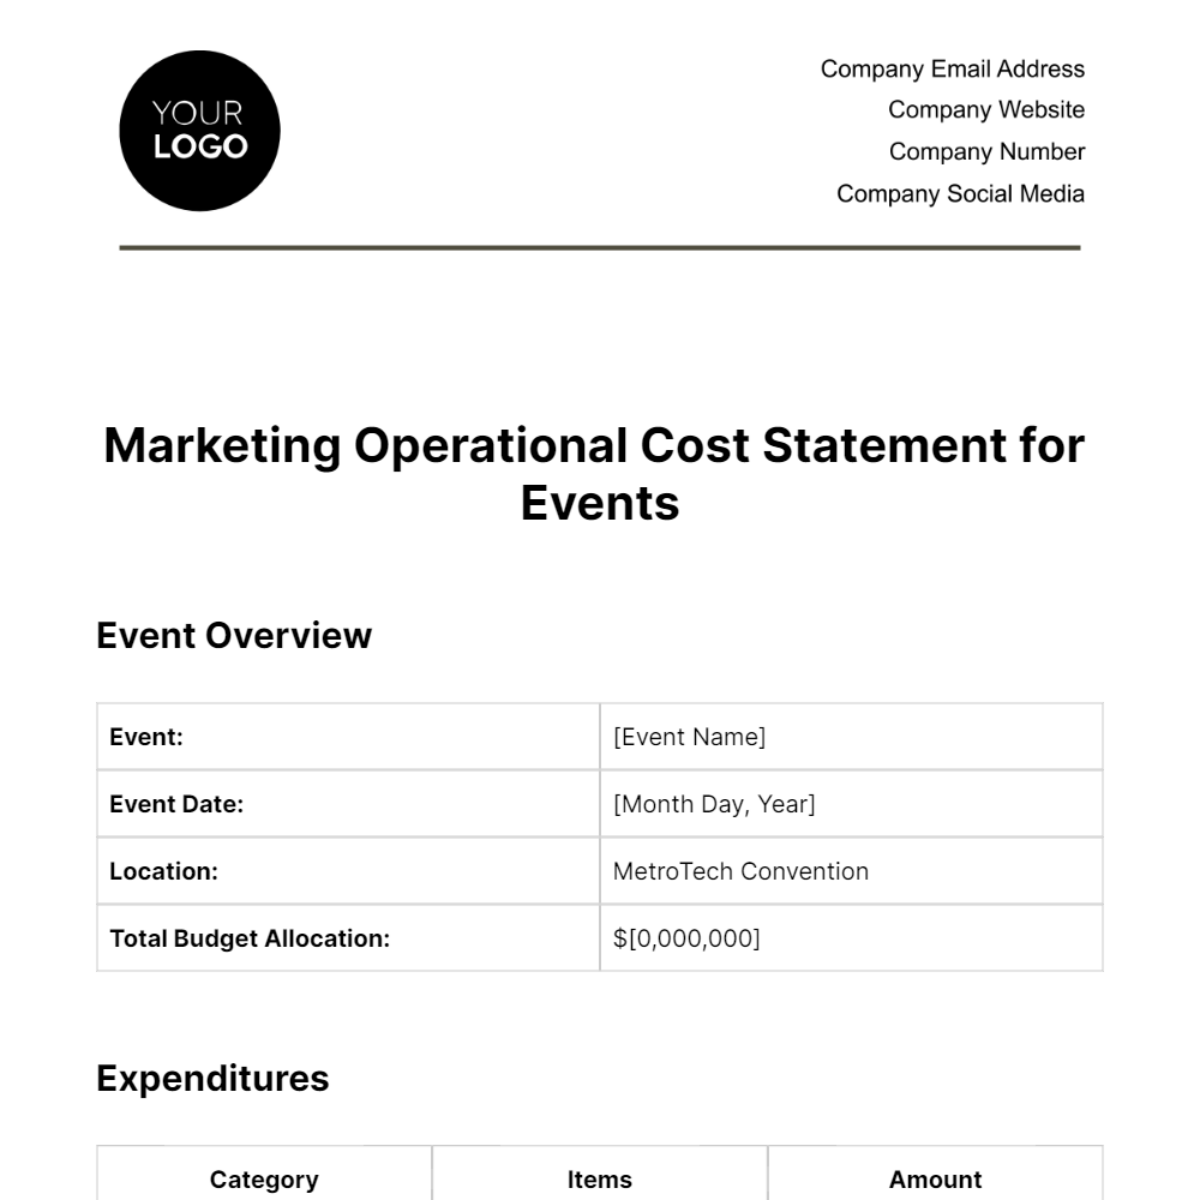 Free Marketing Operational Cost Statement for Events Template